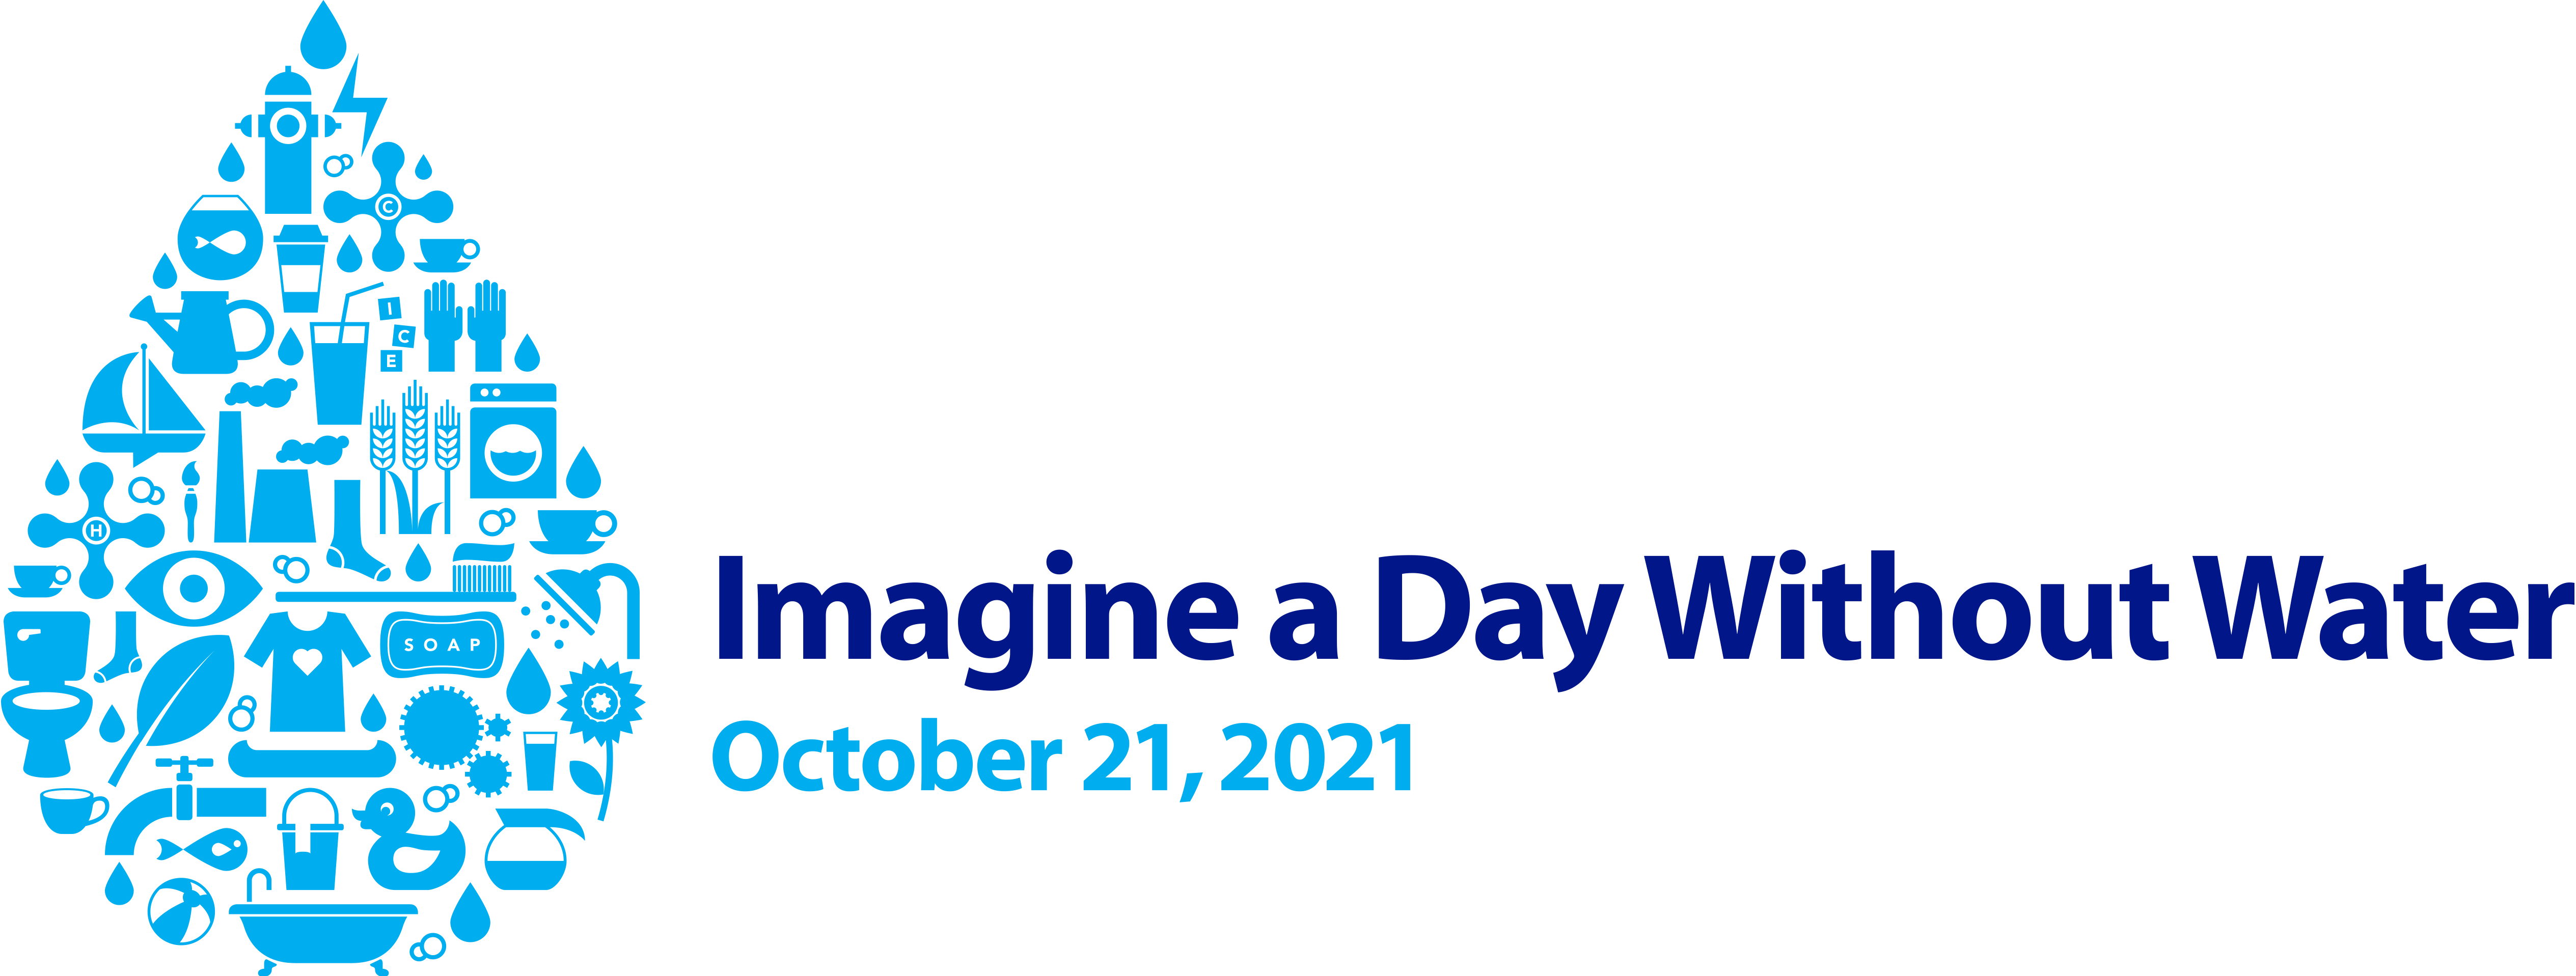 Imagine a Day Without Water, Oct. 21, 2021